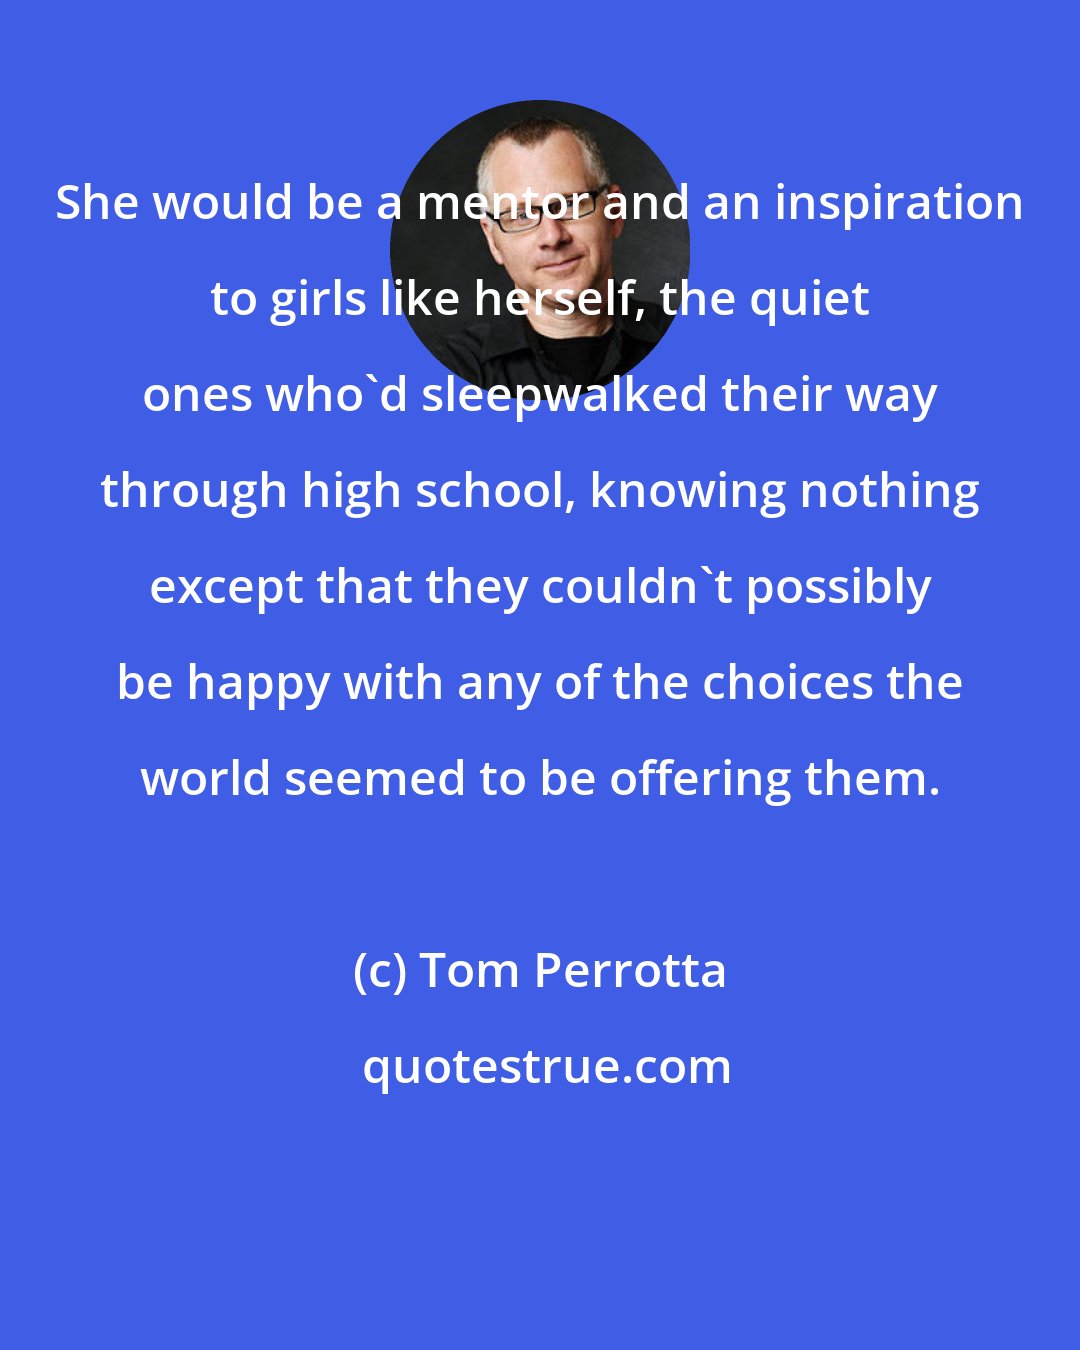 Tom Perrotta: She would be a mentor and an inspiration to girls like herself, the quiet ones who'd sleepwalked their way through high school, knowing nothing except that they couldn't possibly be happy with any of the choices the world seemed to be offering them.